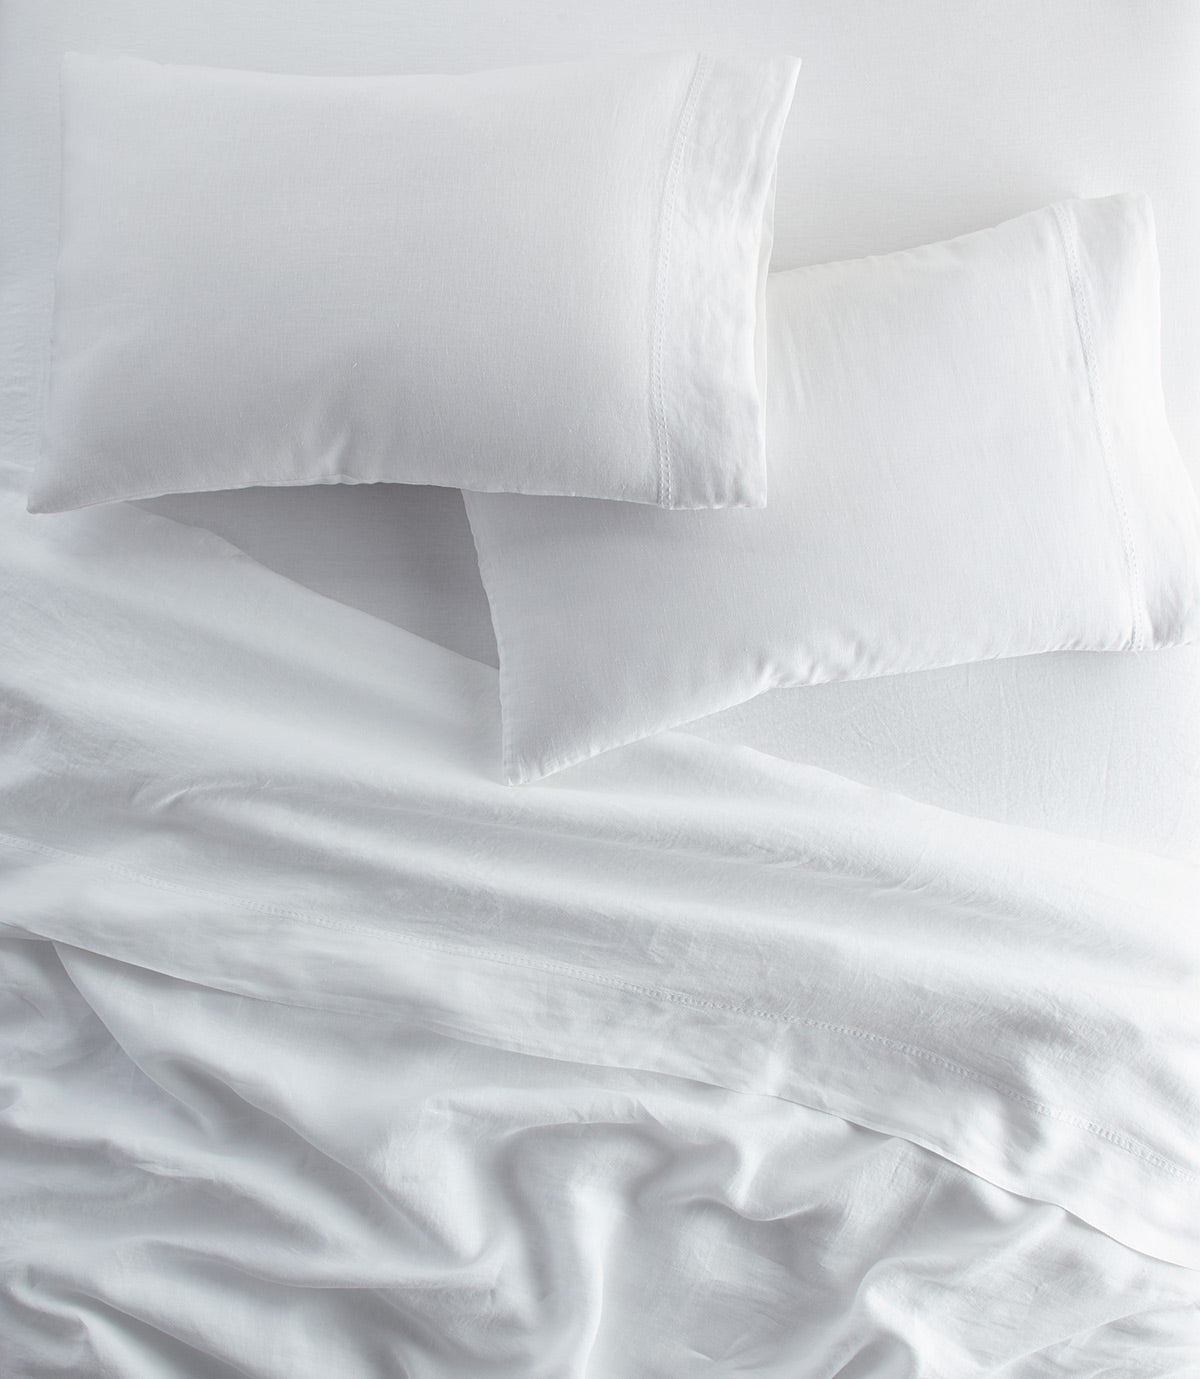 European Washed Linen Flat Sheet and pillows on bed, White